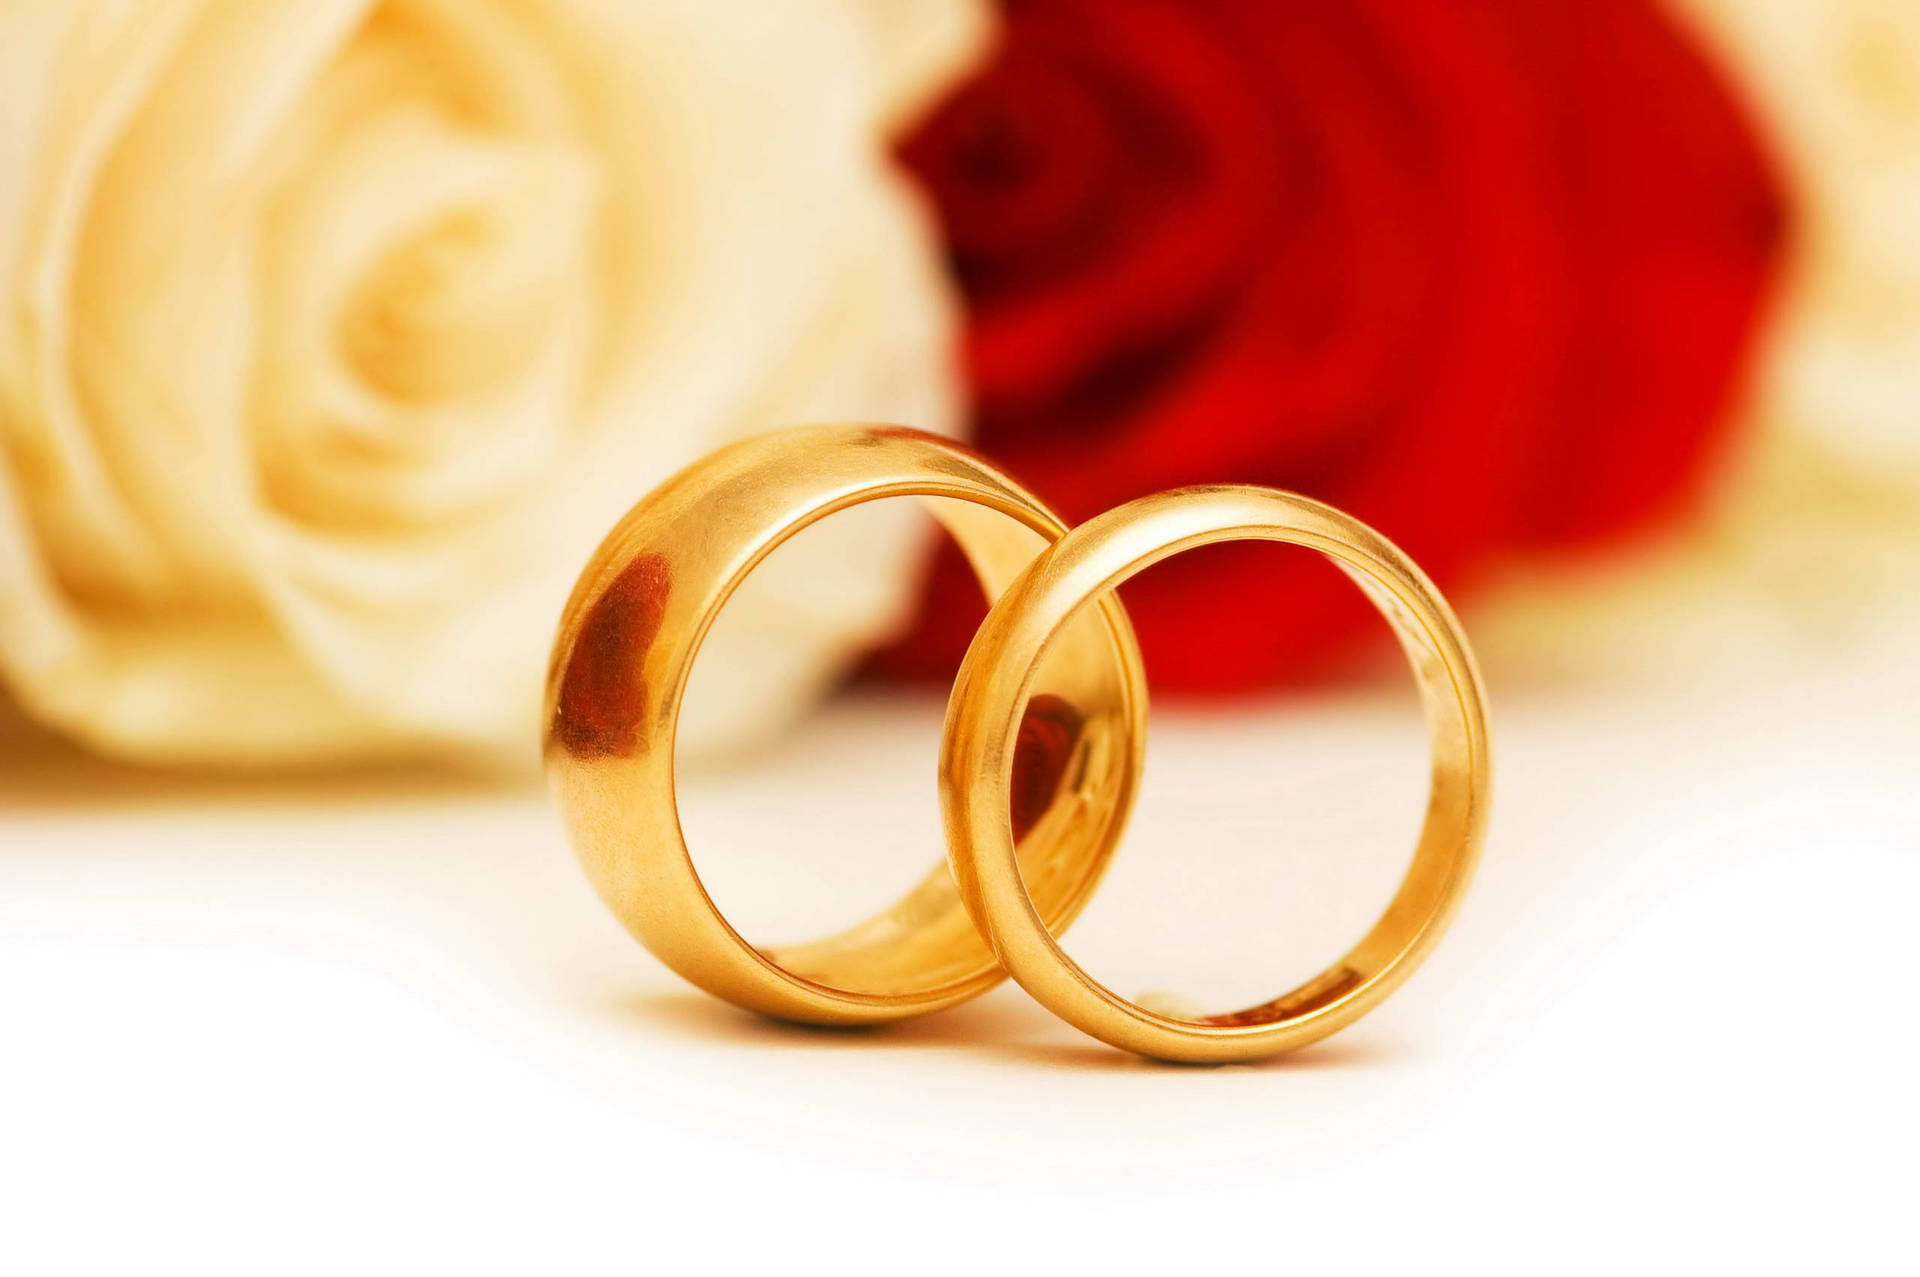 Gold Wedding Rings And Roses